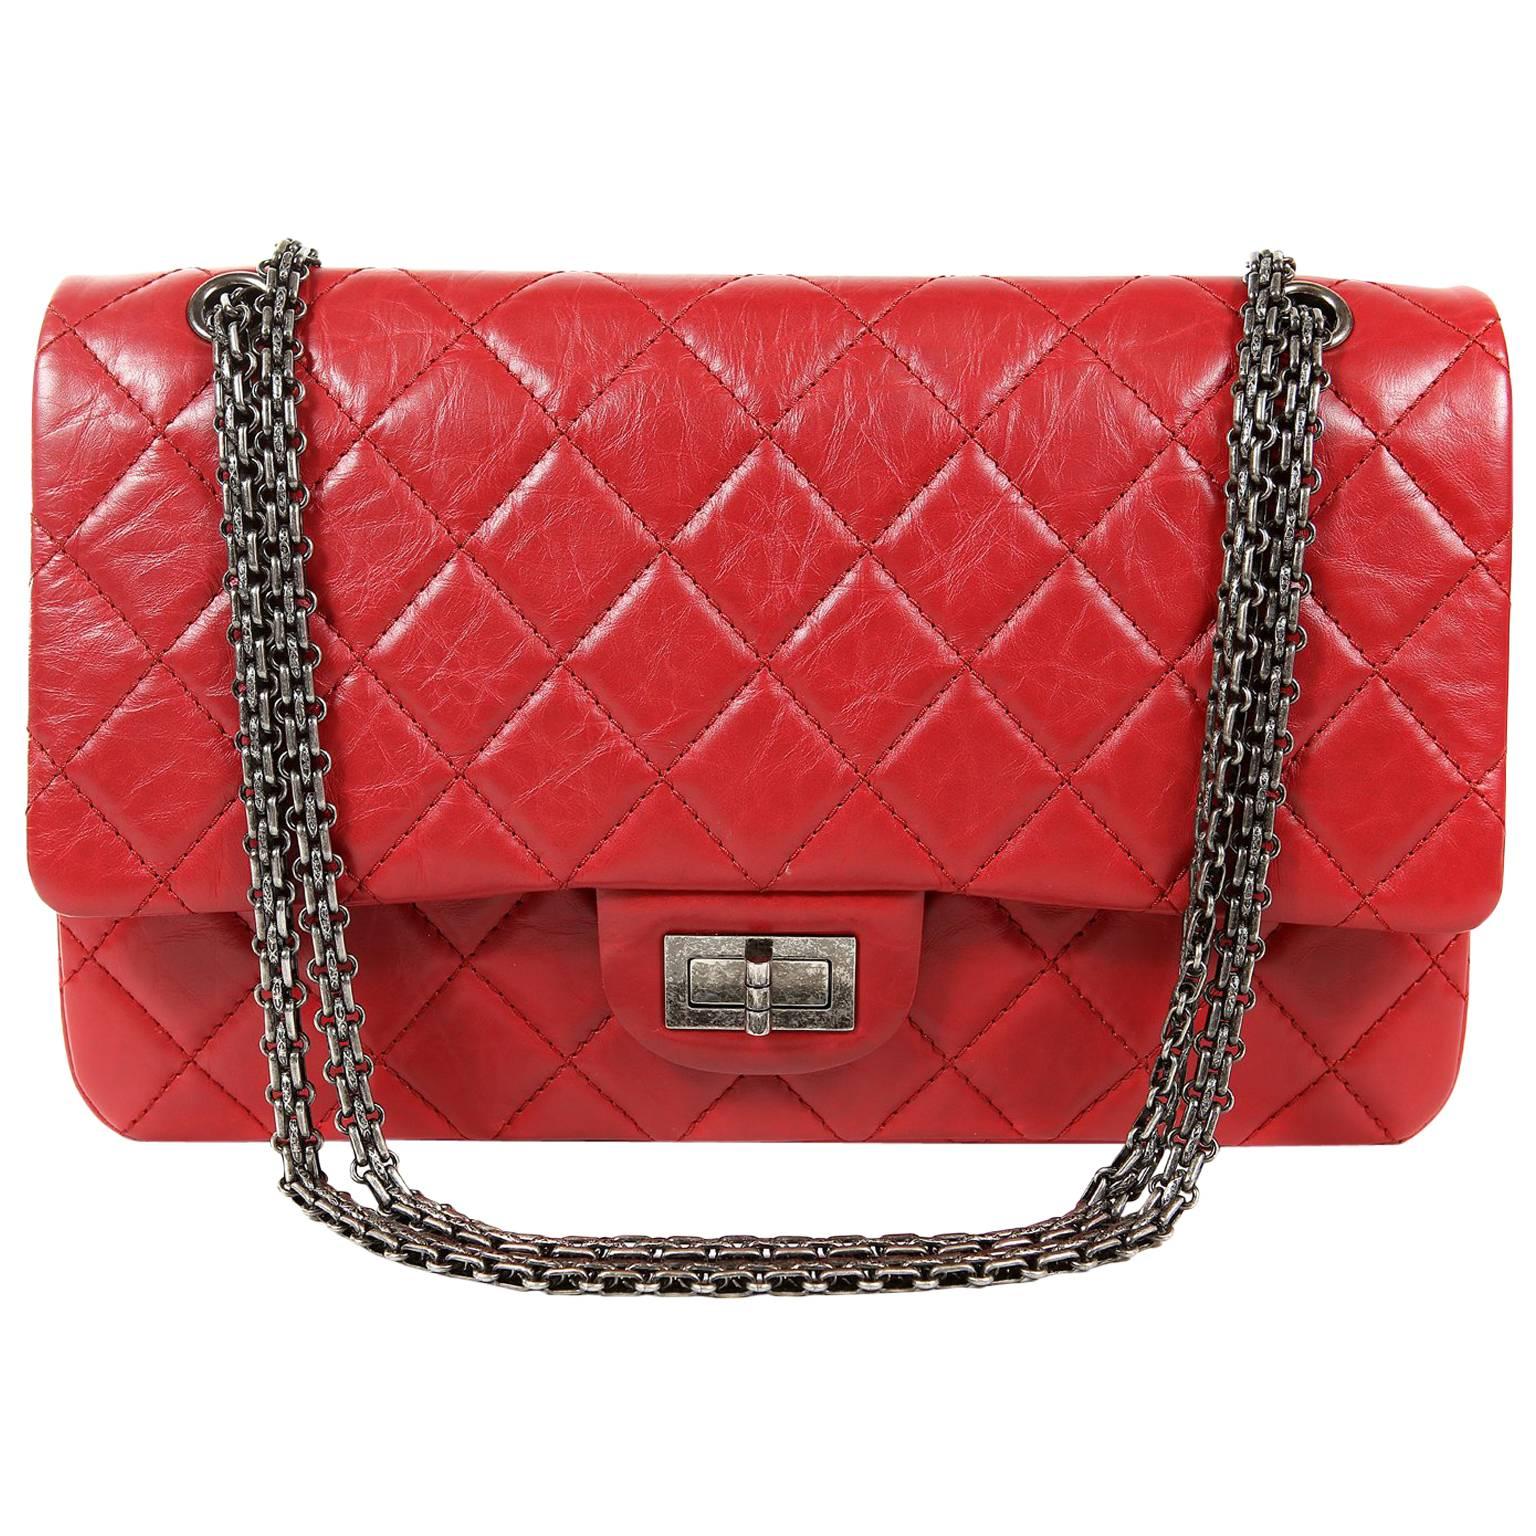 AUTHENTIC CHANEL Lambskin 2.55 Reissue 277 Double Flap Red PREOWNED (W –  Jj's Closet, LLC